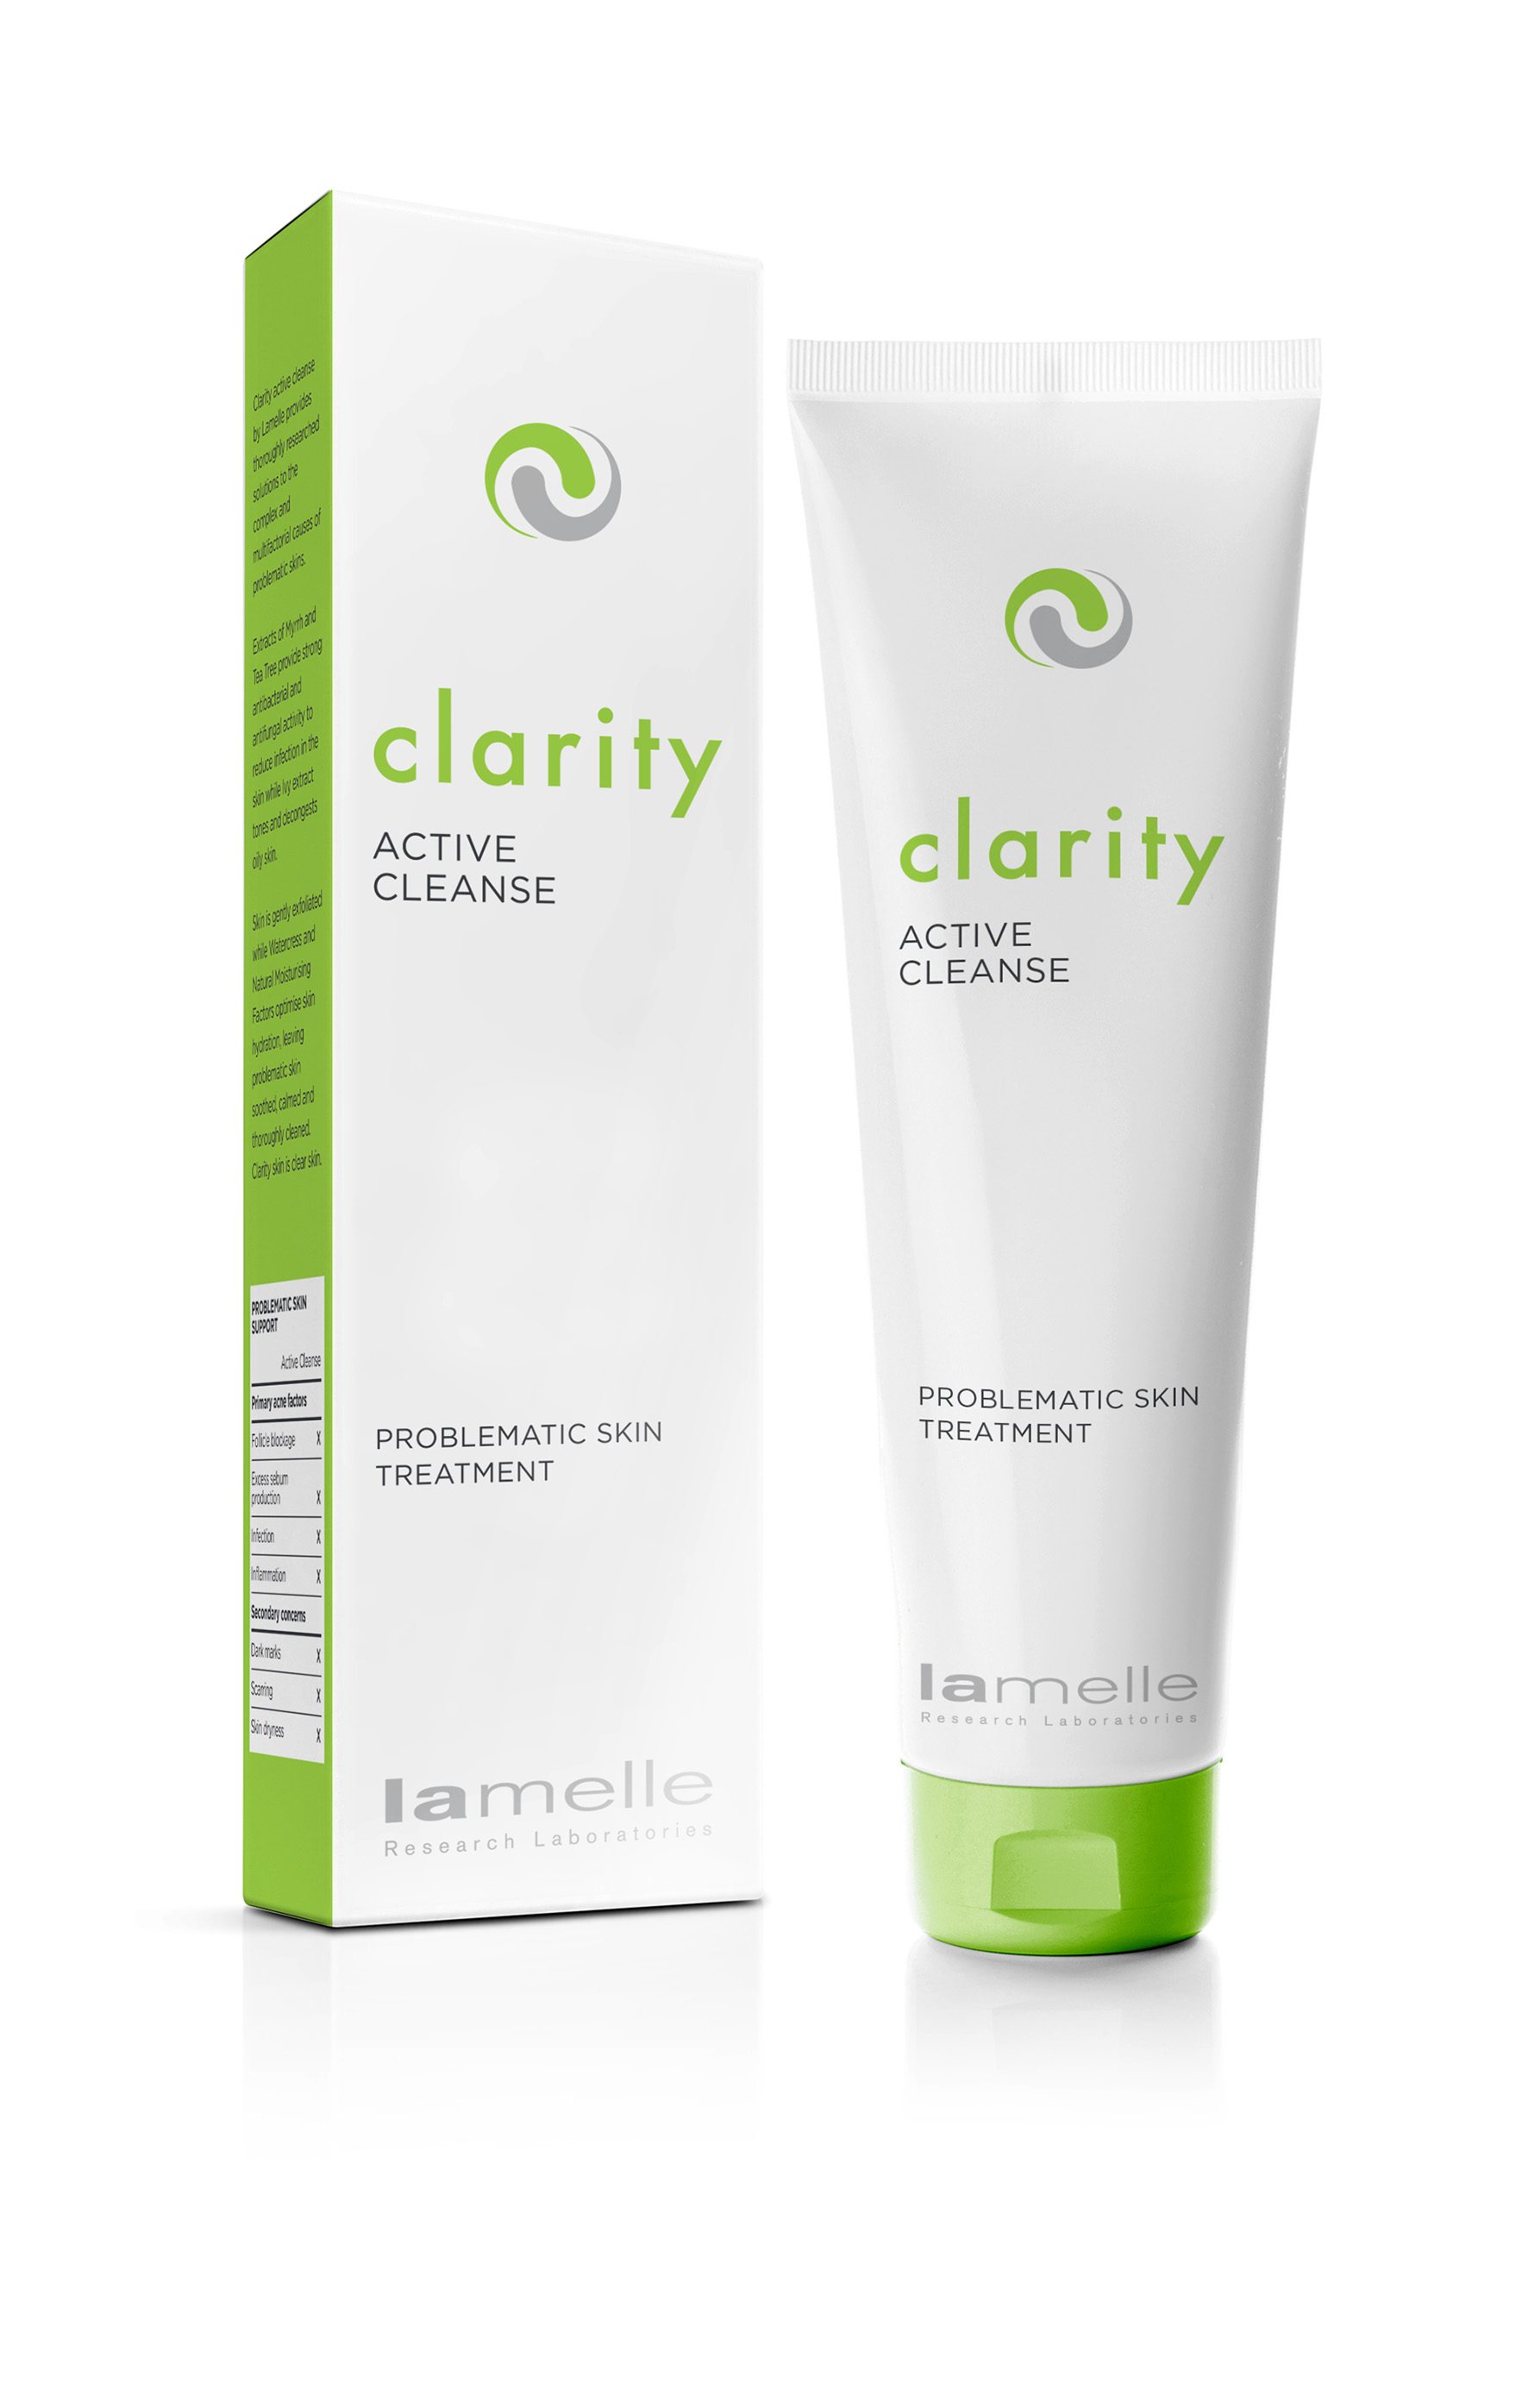 Clarity Active Cleanse